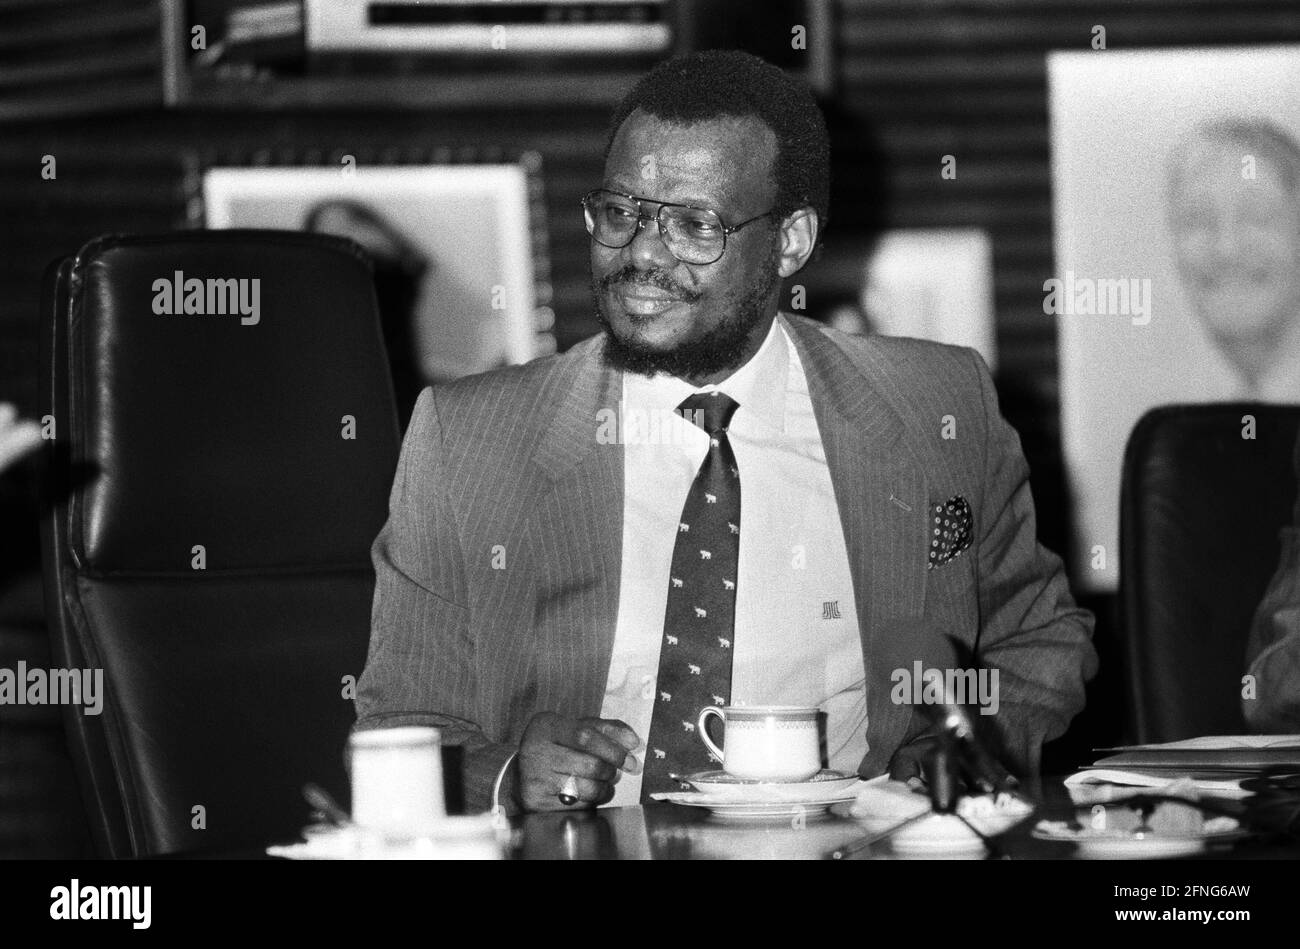 South Africa, Cape Town, September 1994. archive no: 04-70-24 Mangosuthu Gatsha Buthelezi is a South African politician. He is the leader of the Zulu Inkatha Freedom Party (IFP), which he founded in 1975, and was South African Minister of Home Affairs from 1994 to 2004. [automated translation] Stock Photo